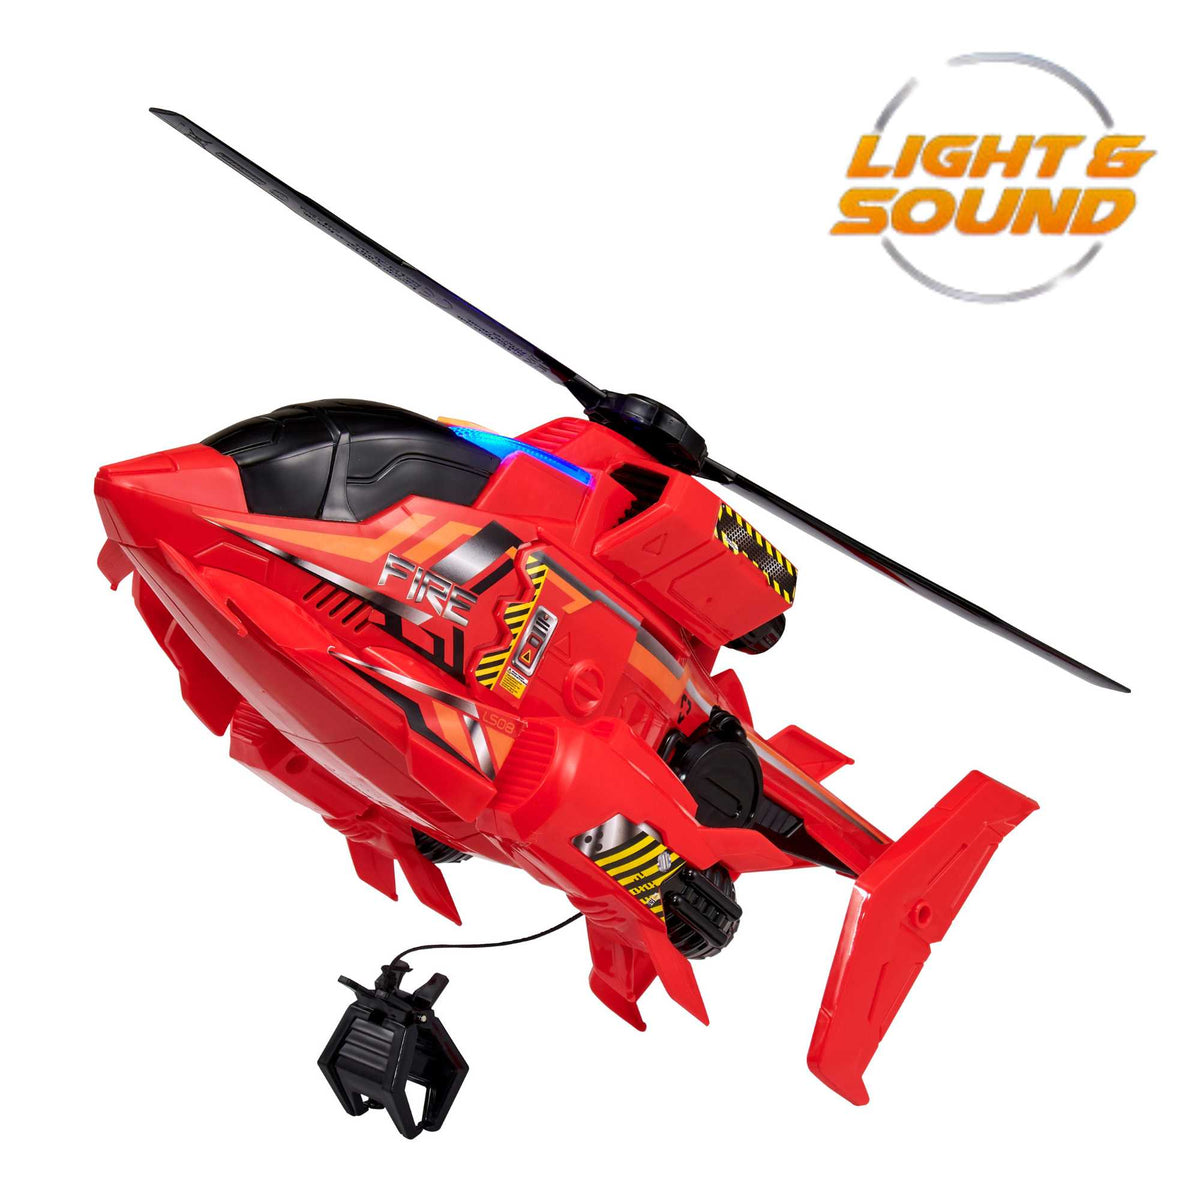 Teamsterz Mean Machine Lights &amp; Sounds Fire Rescue Helicopter